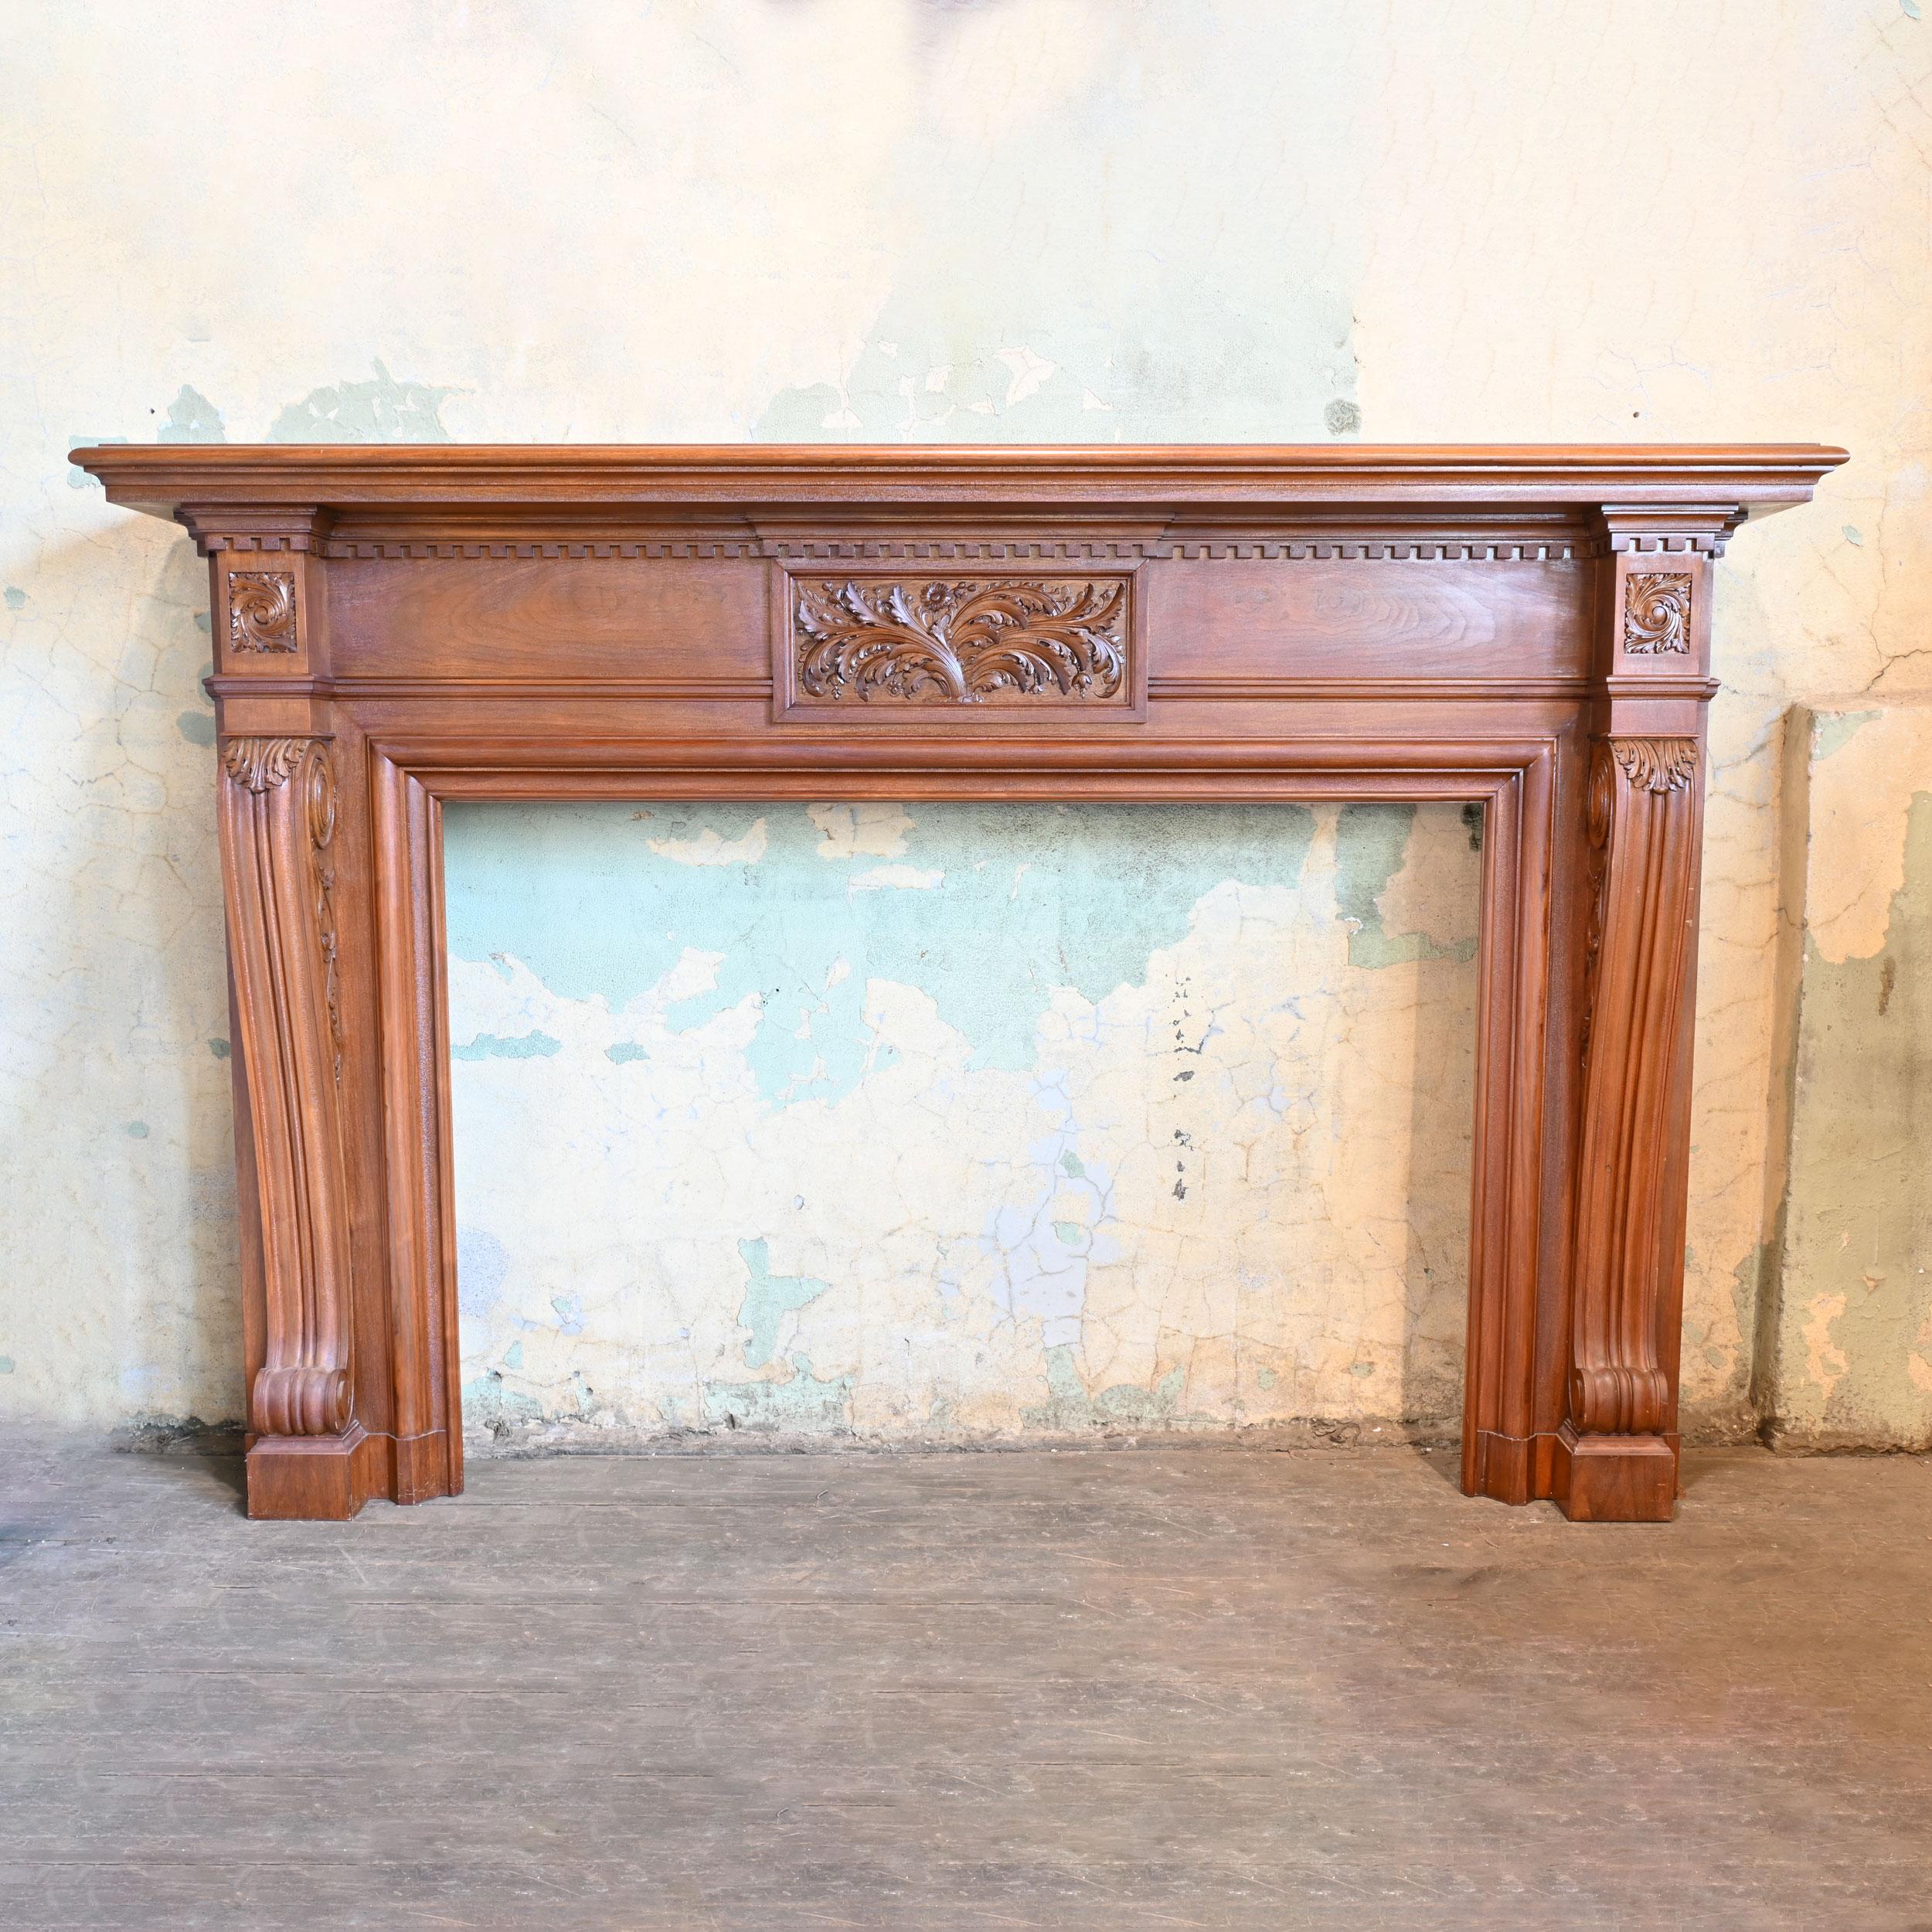 This mantel along with two corner cabinets and a rounded room divider were salvaged by our team from a local Edina home. 

circa salvaged from a 1941 Edina home
Condition: Age consistent/Wonderfully Made
Material: Carved walnut 
Finish: